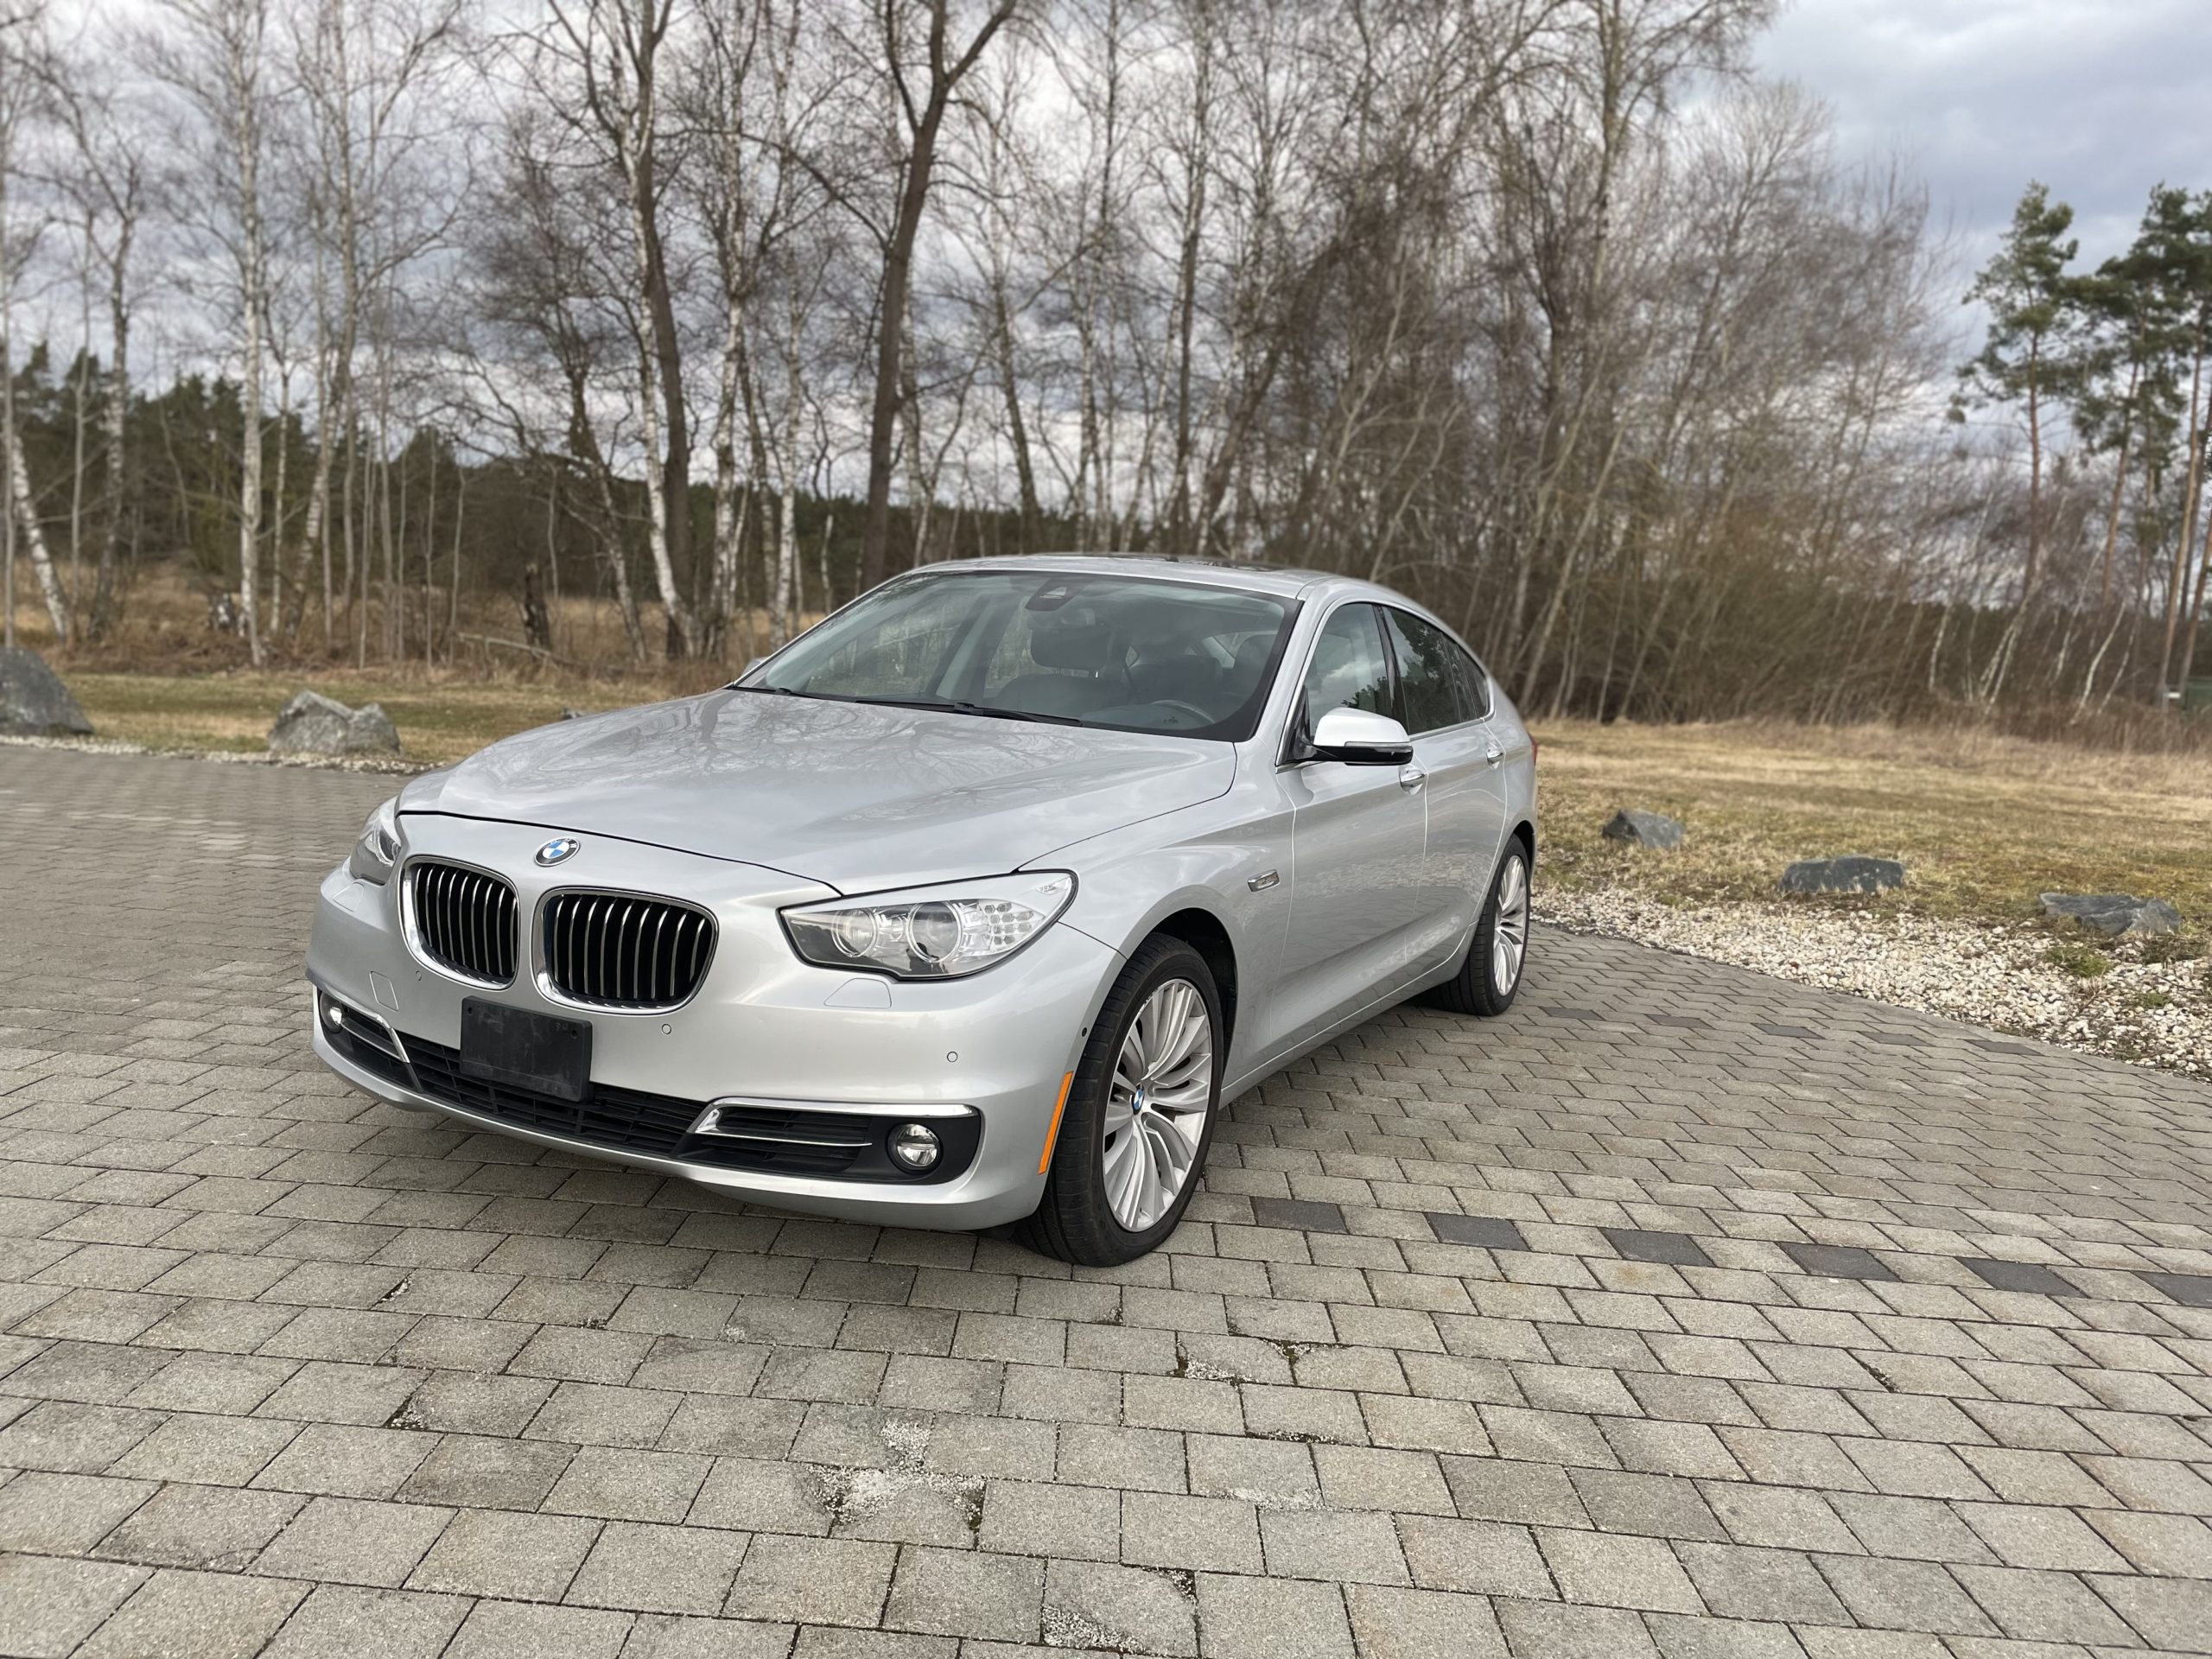 2015 BMW 535i xDrive GT Luxury Line<br>AWD</br>as low as </br>$239 per paycheck